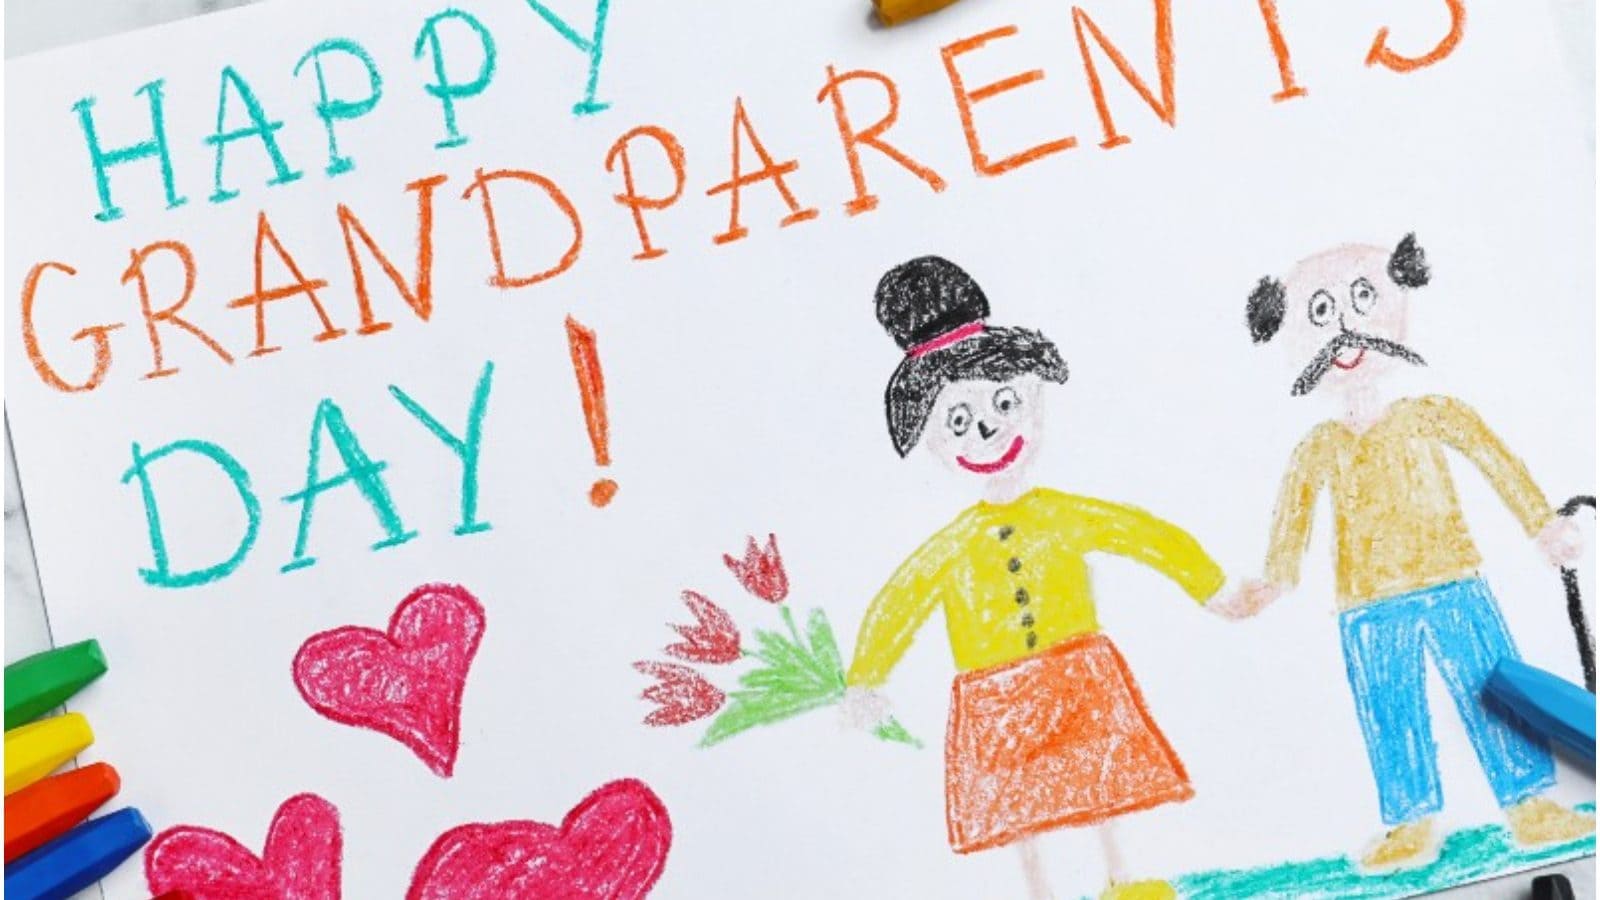 Happy Grandparents' Day 2021 Images, Wishes, Quotes, Messages and